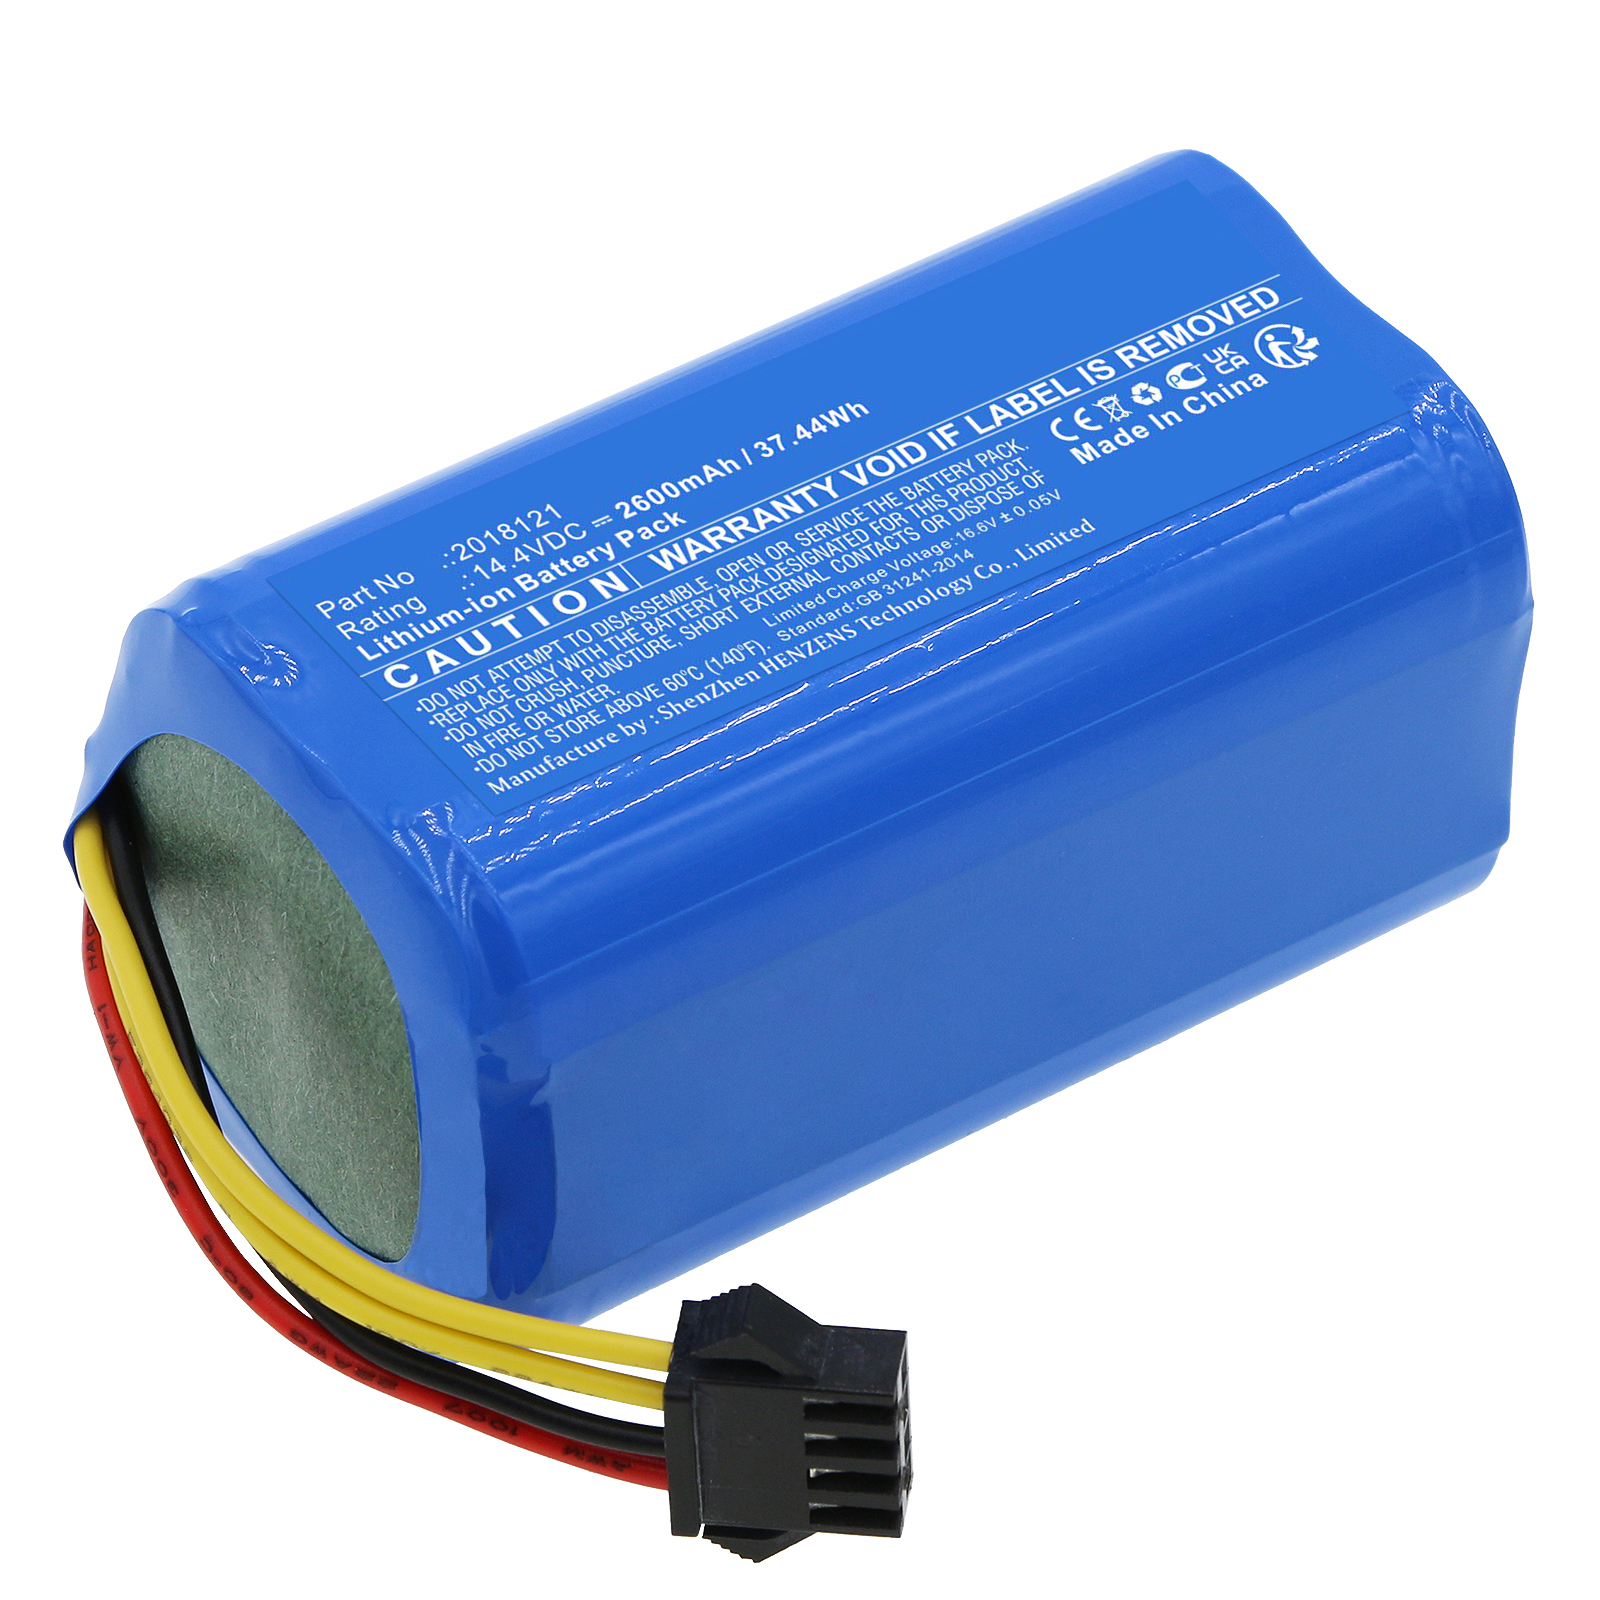 Batteries for JologVacuum Cleaner